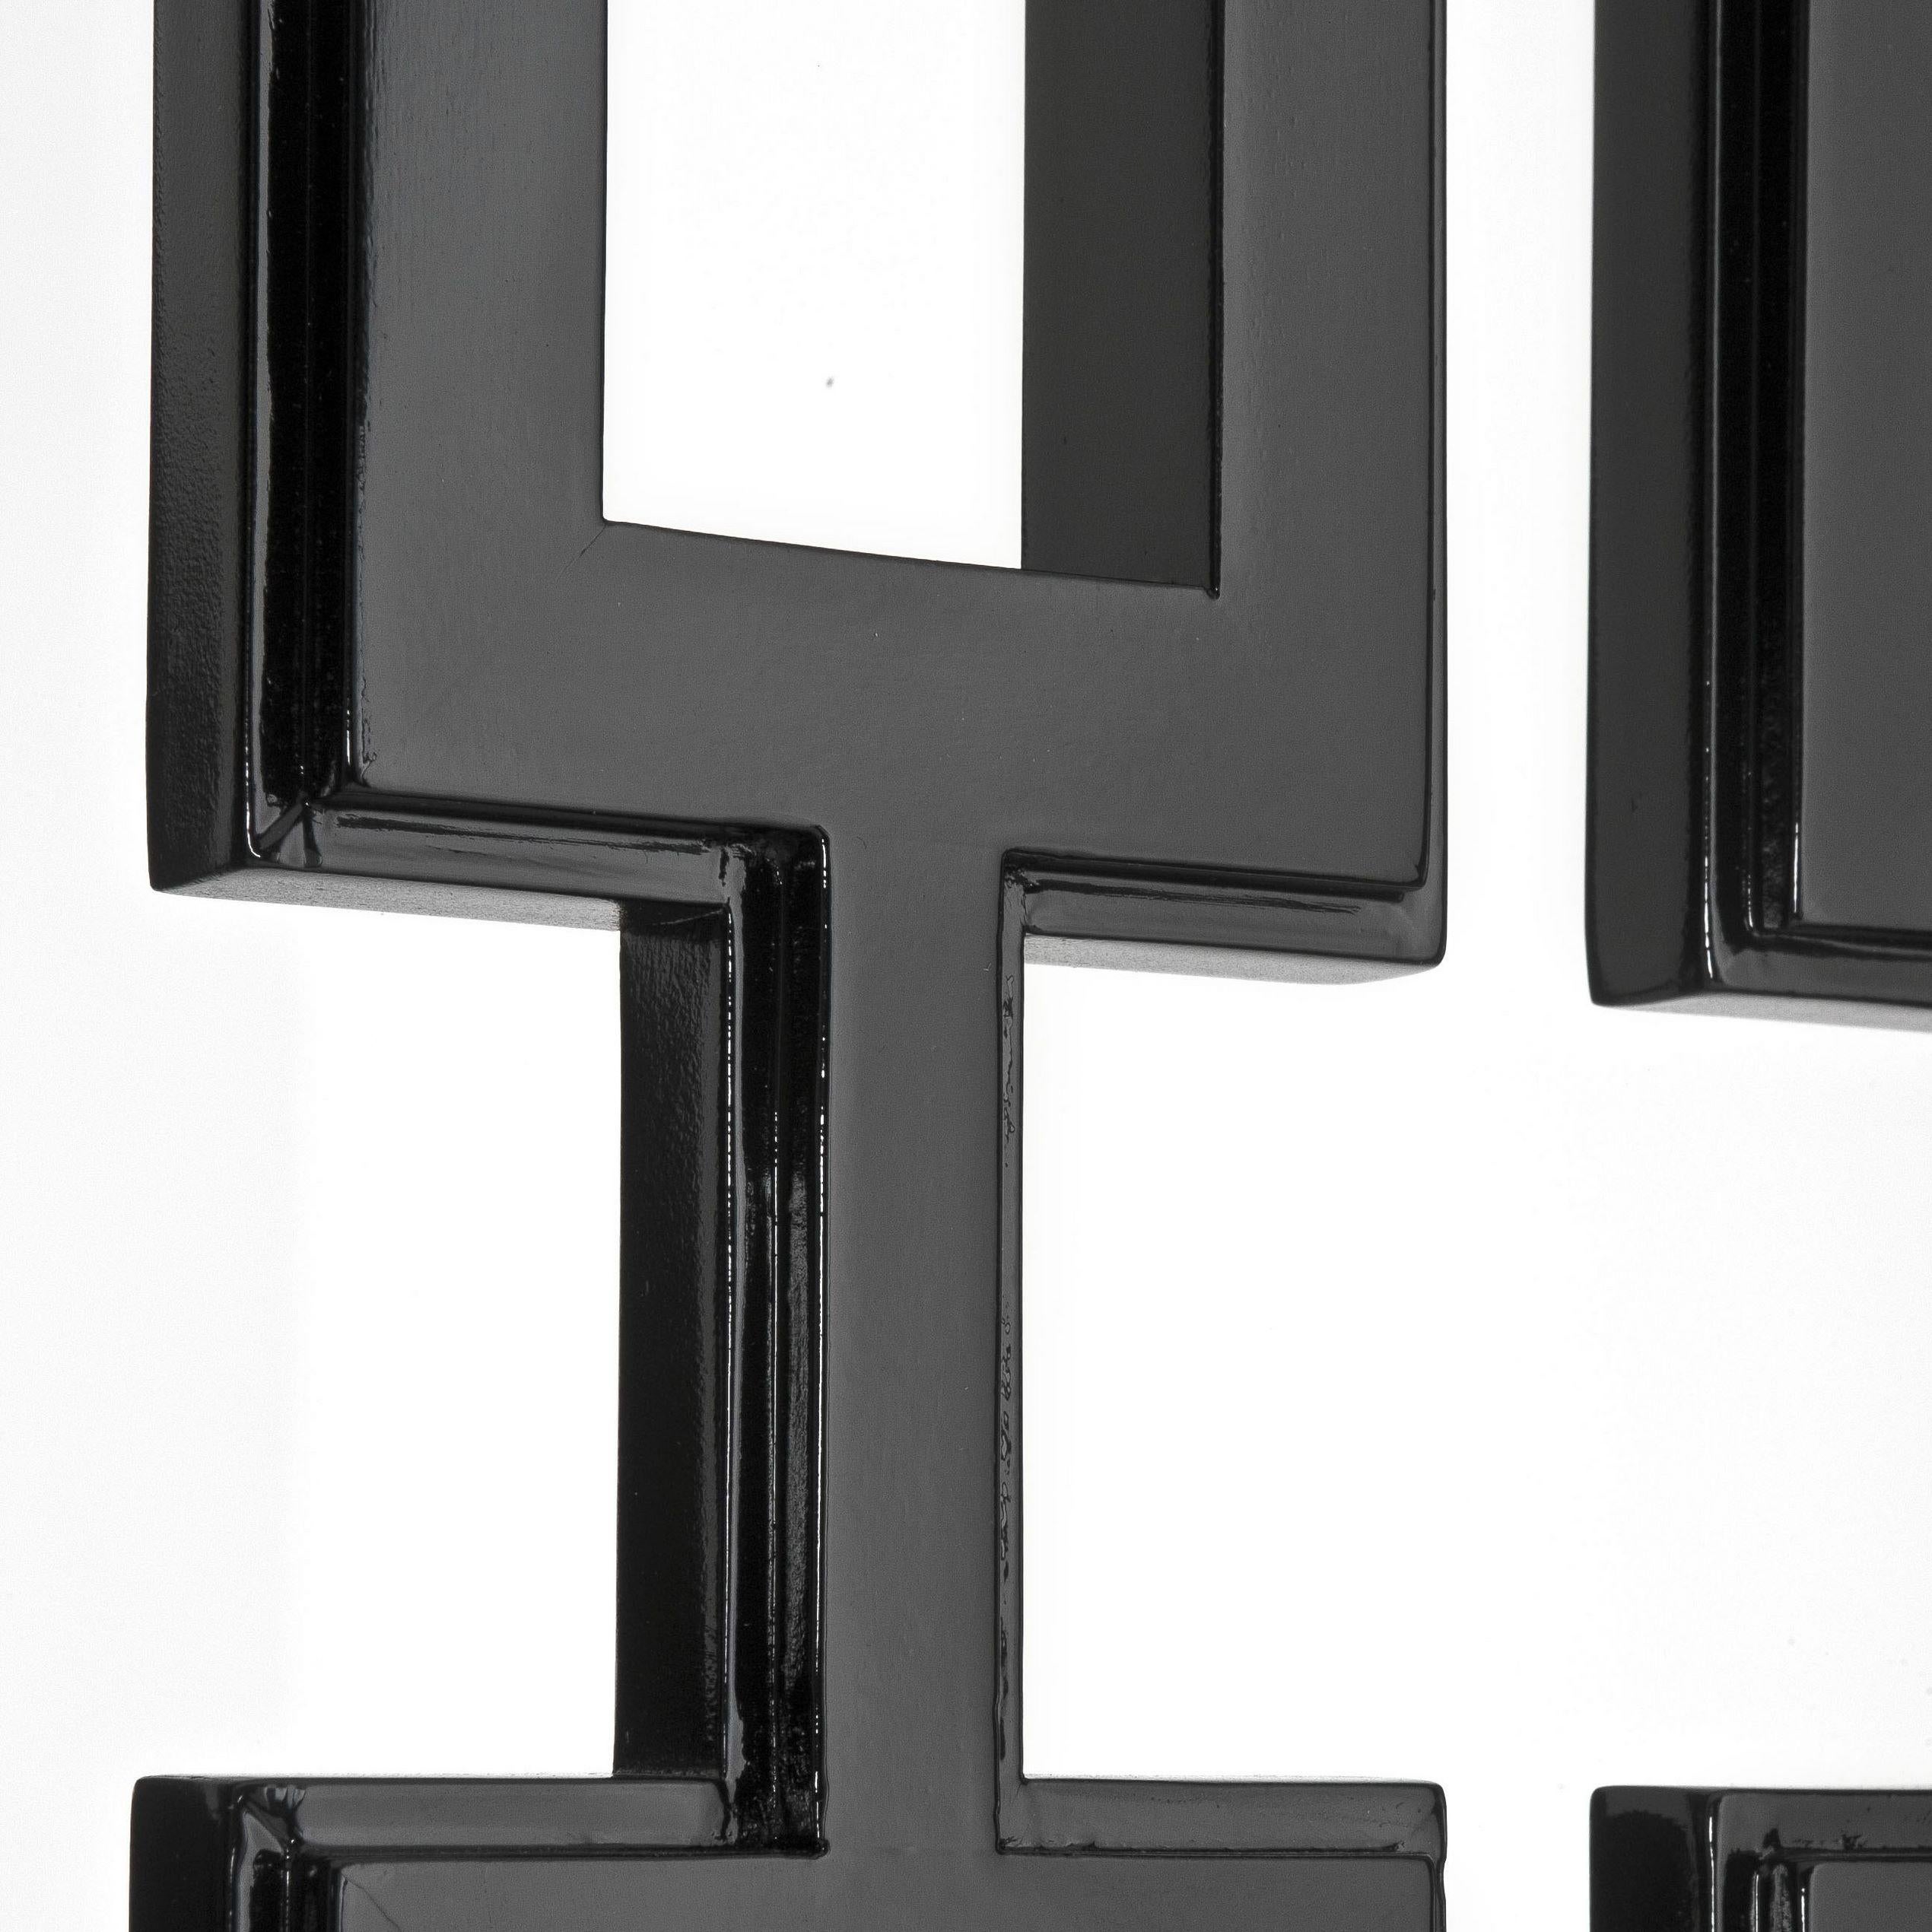 Graphic and highly decorative folding screen divider in black lacquer finish with stainless steel feet.